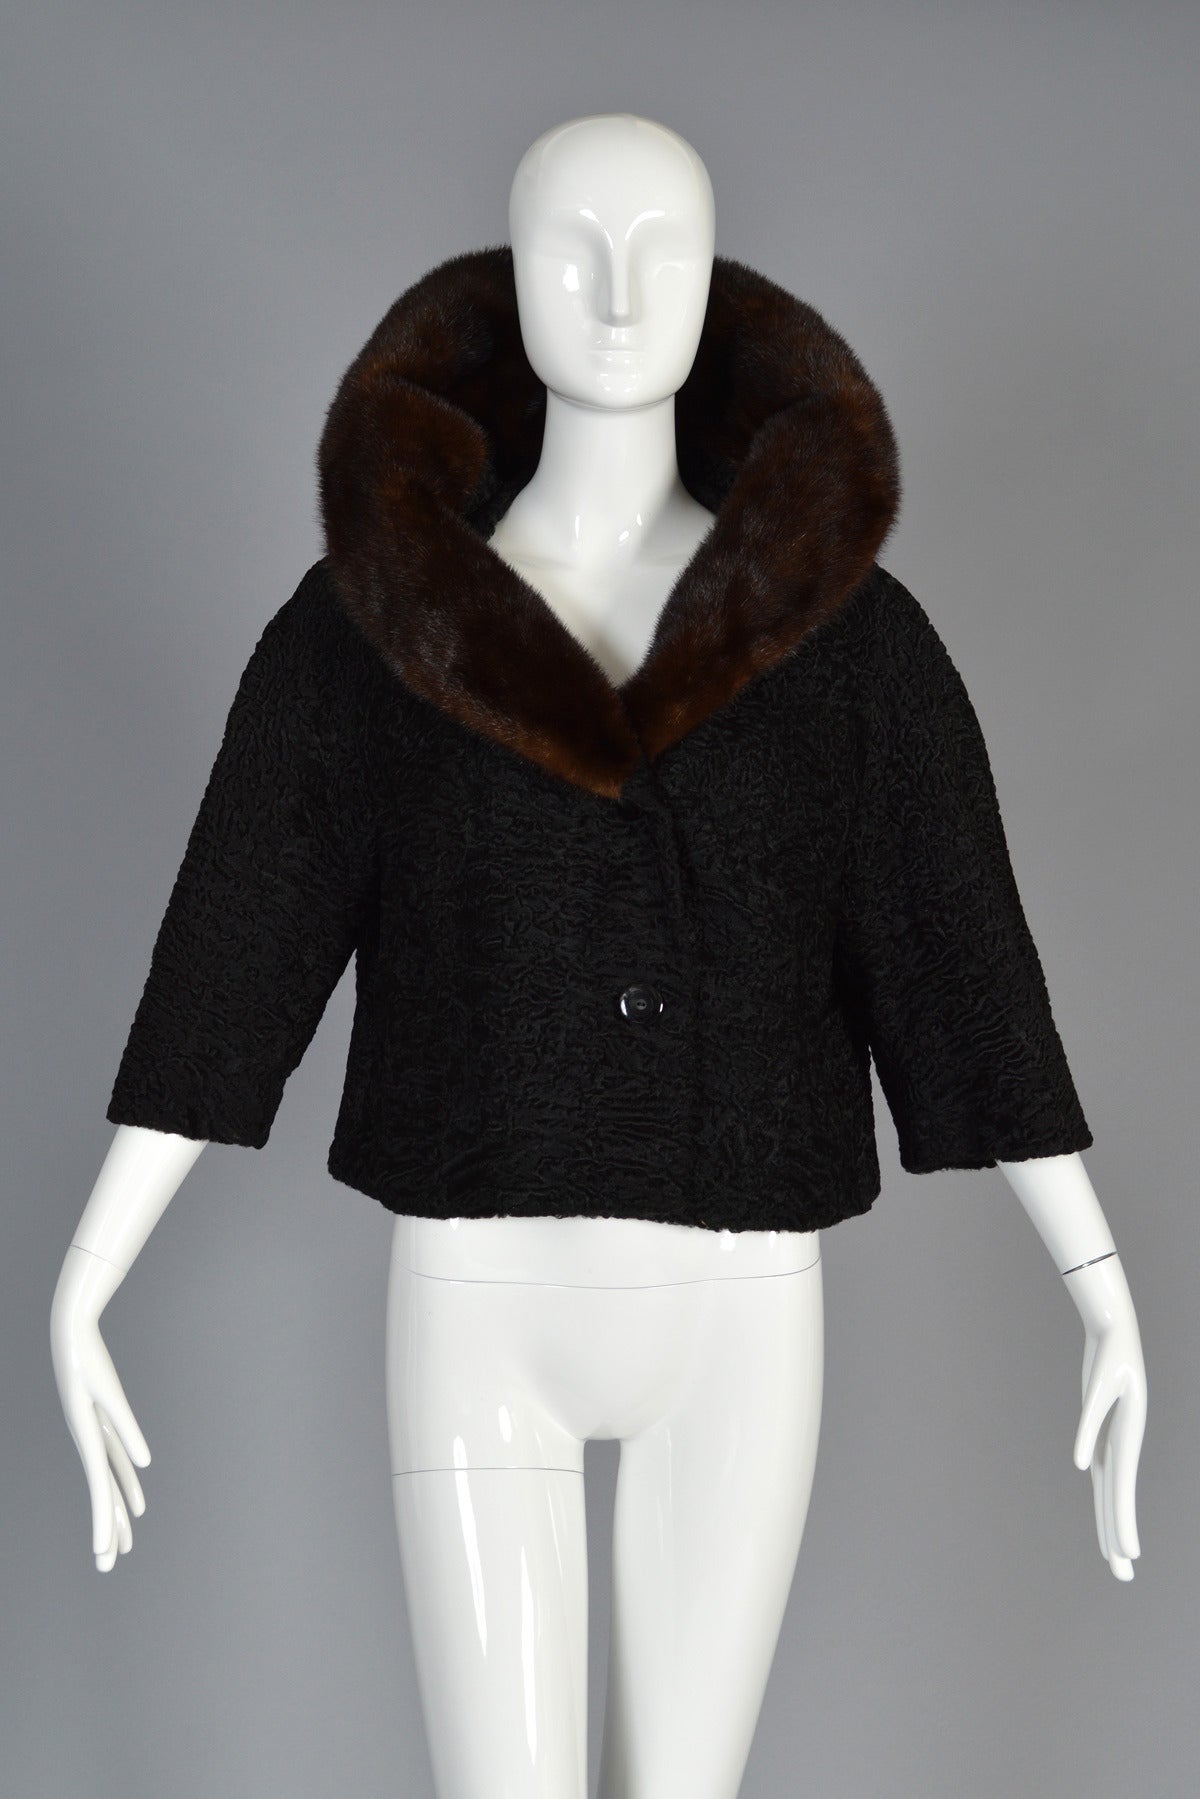 Lovely 1950s/60s Elsa Schiaparelli fur coat. BEAUTIFUL find! Short, cropped Persian lamb fur body with 3/4 sleeves, wide cut and MASSIVE lamb-backed mink collar. Also features double button front and simple besom pockets. Truly a simple + chic